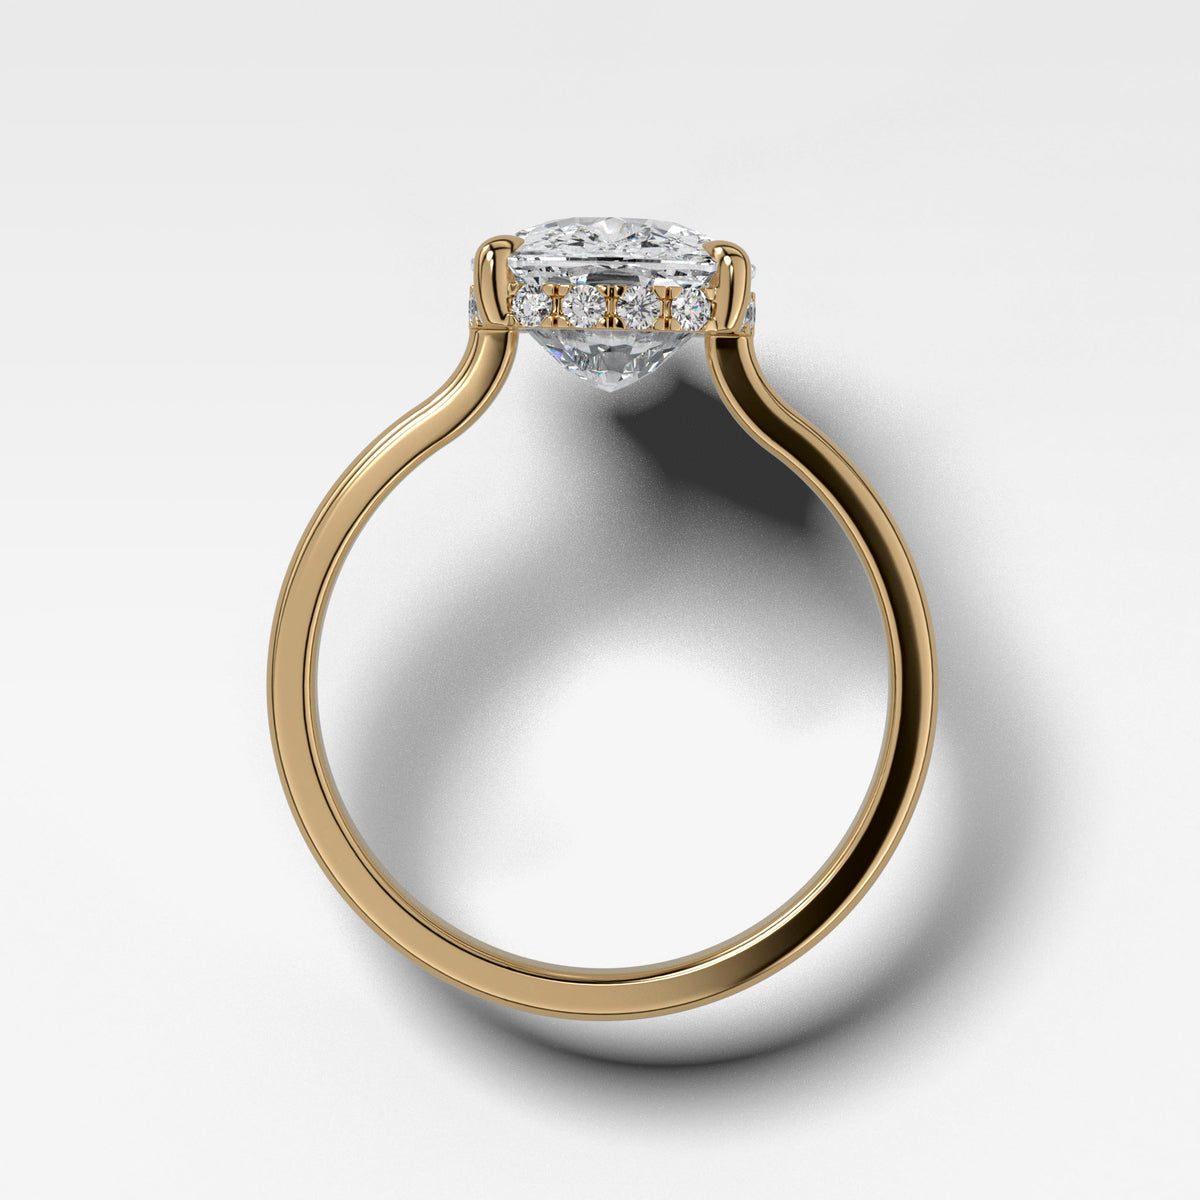 Compass Solitaire Engagement Ring with Elongated Cushion Cut Diamond